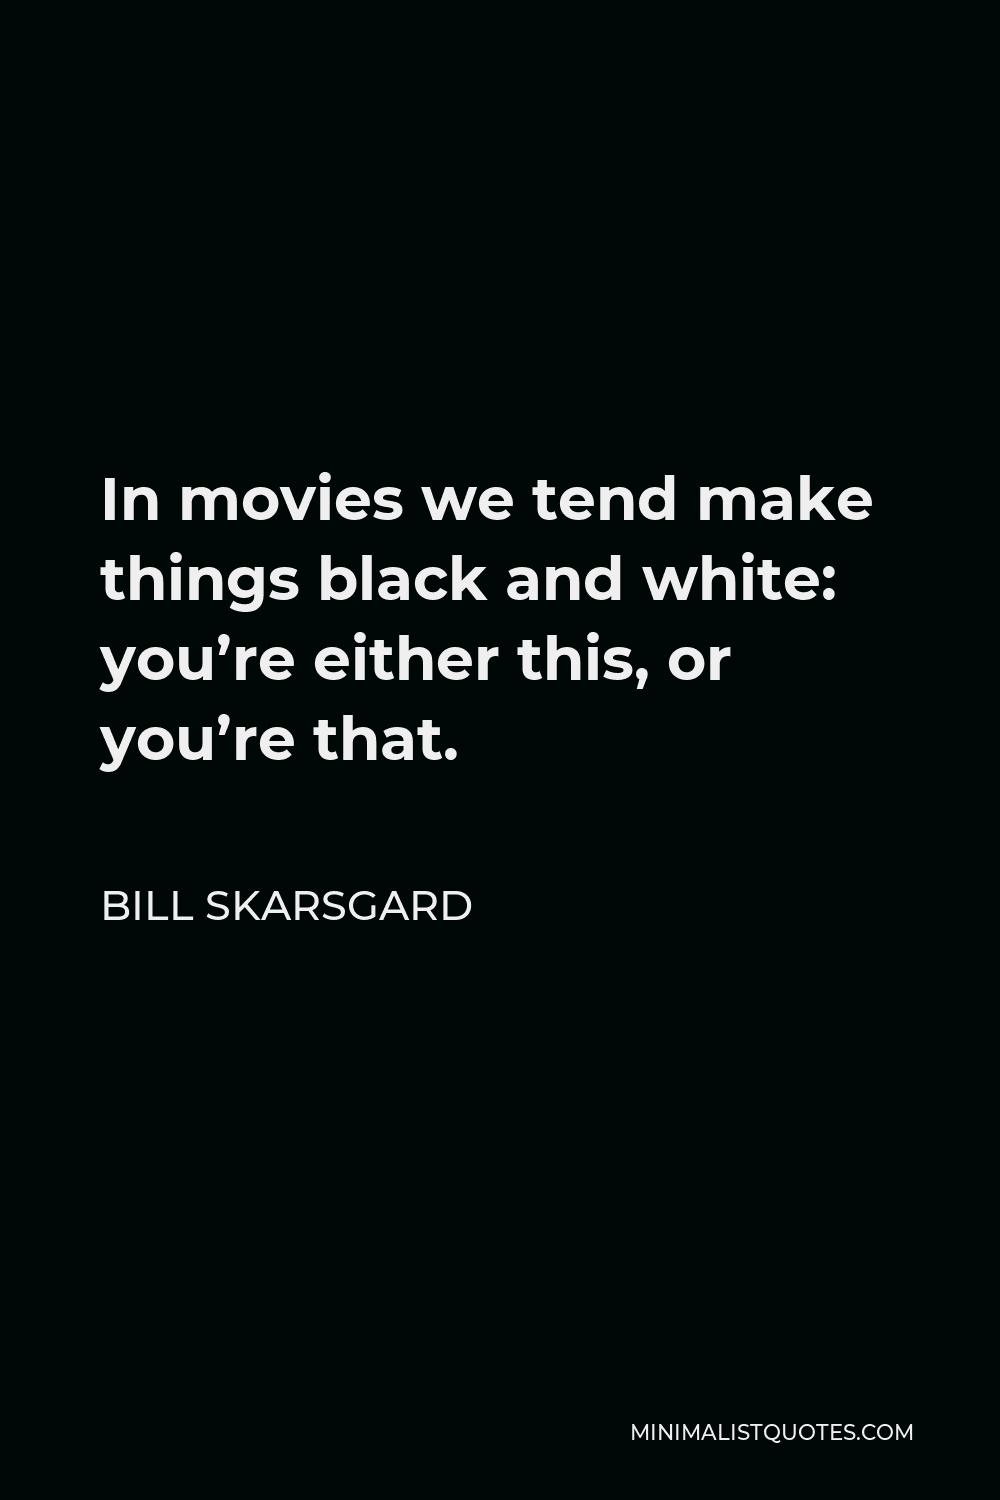 Bill Skarsgard Quote - In movies we tend make things black and white: you’re either this, or you’re that.